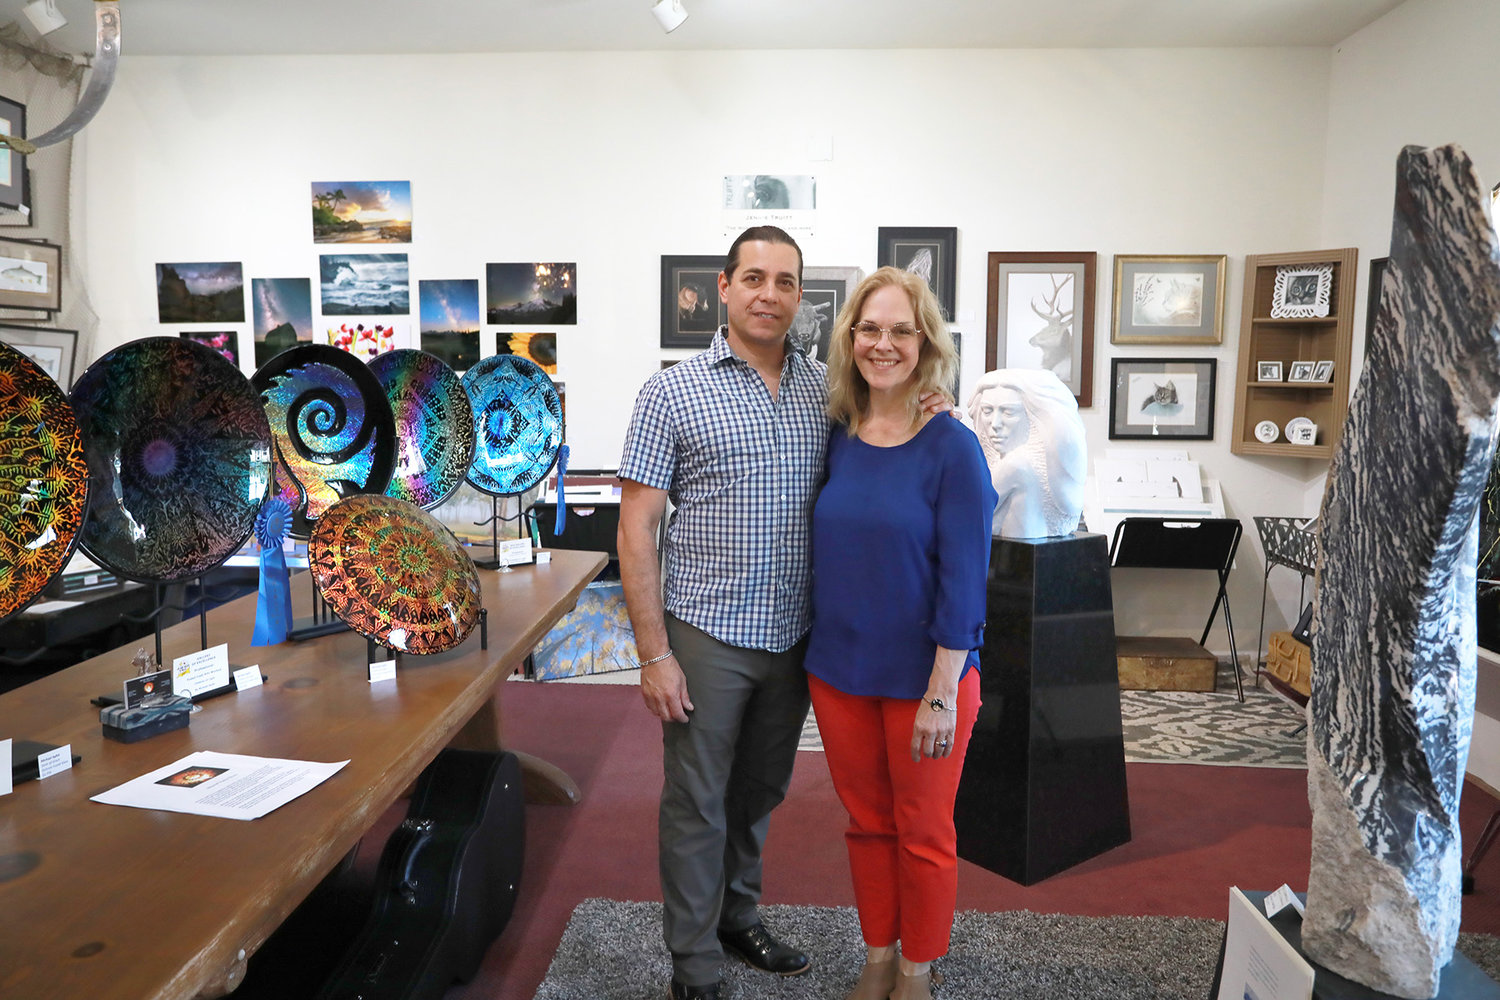 Owners Andrea Levanti and partner Diego Fleitas both artists own the InGenius! gallery. The white statue in the background is also a local artist- Paul Keesler